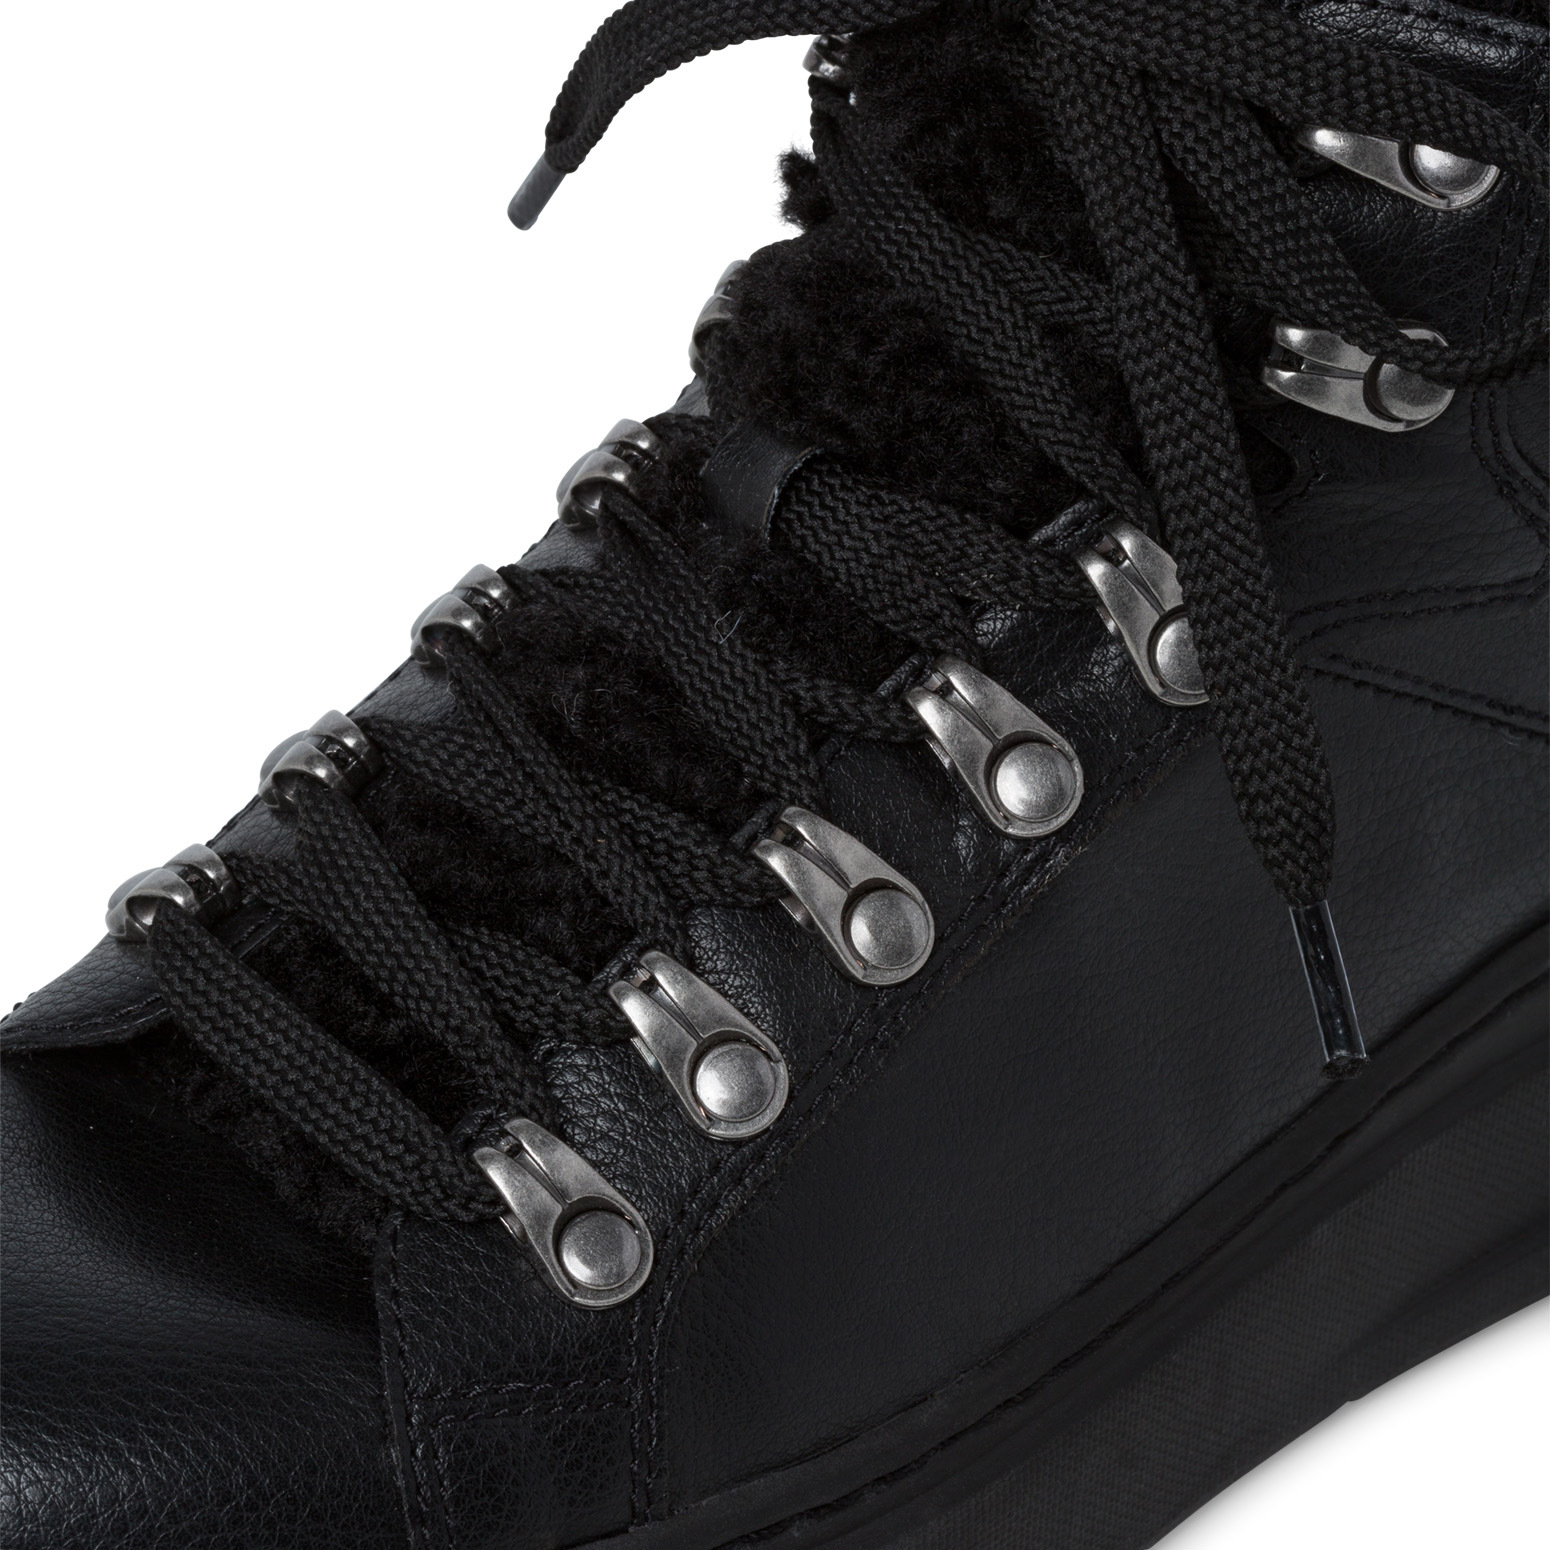 Sneaker Black Textile/Synthetic